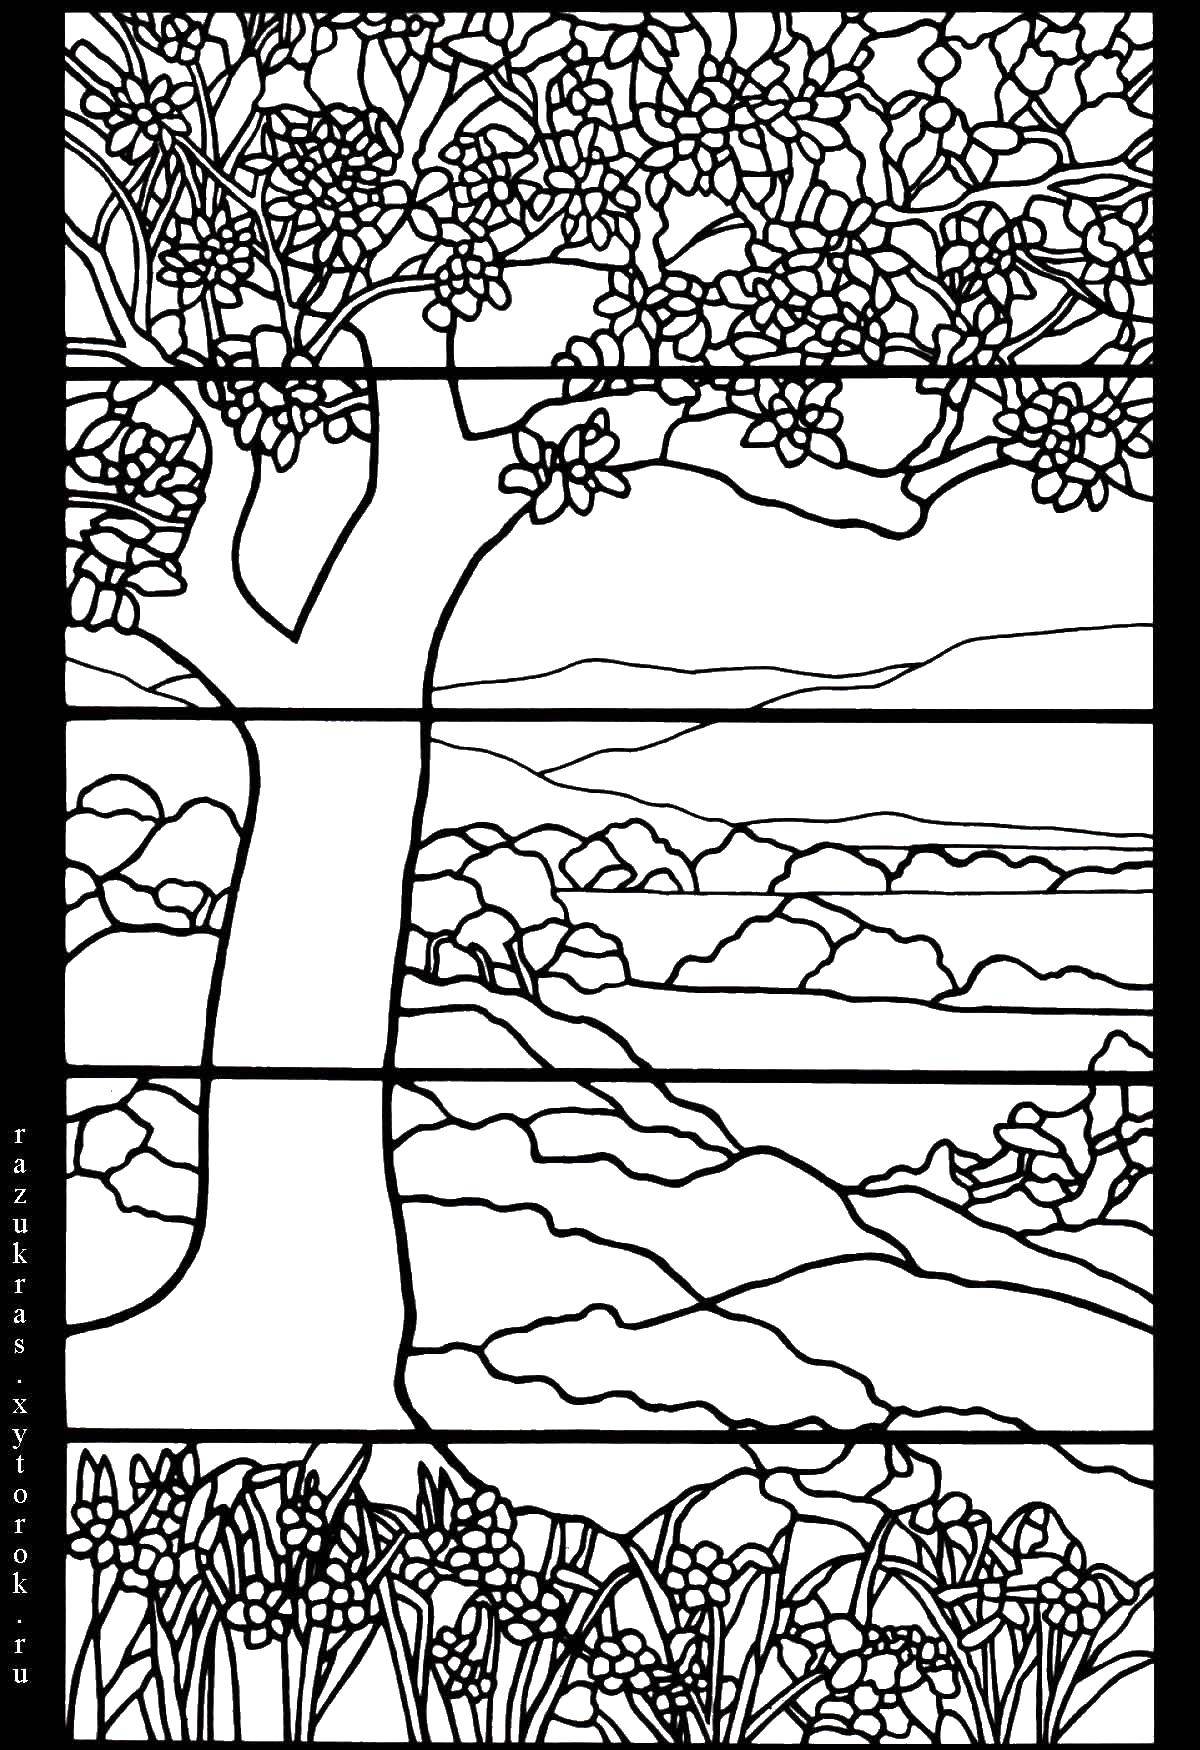 Coloring Tree. Category stained glass. Tags:  stained glass, wood, flowers.